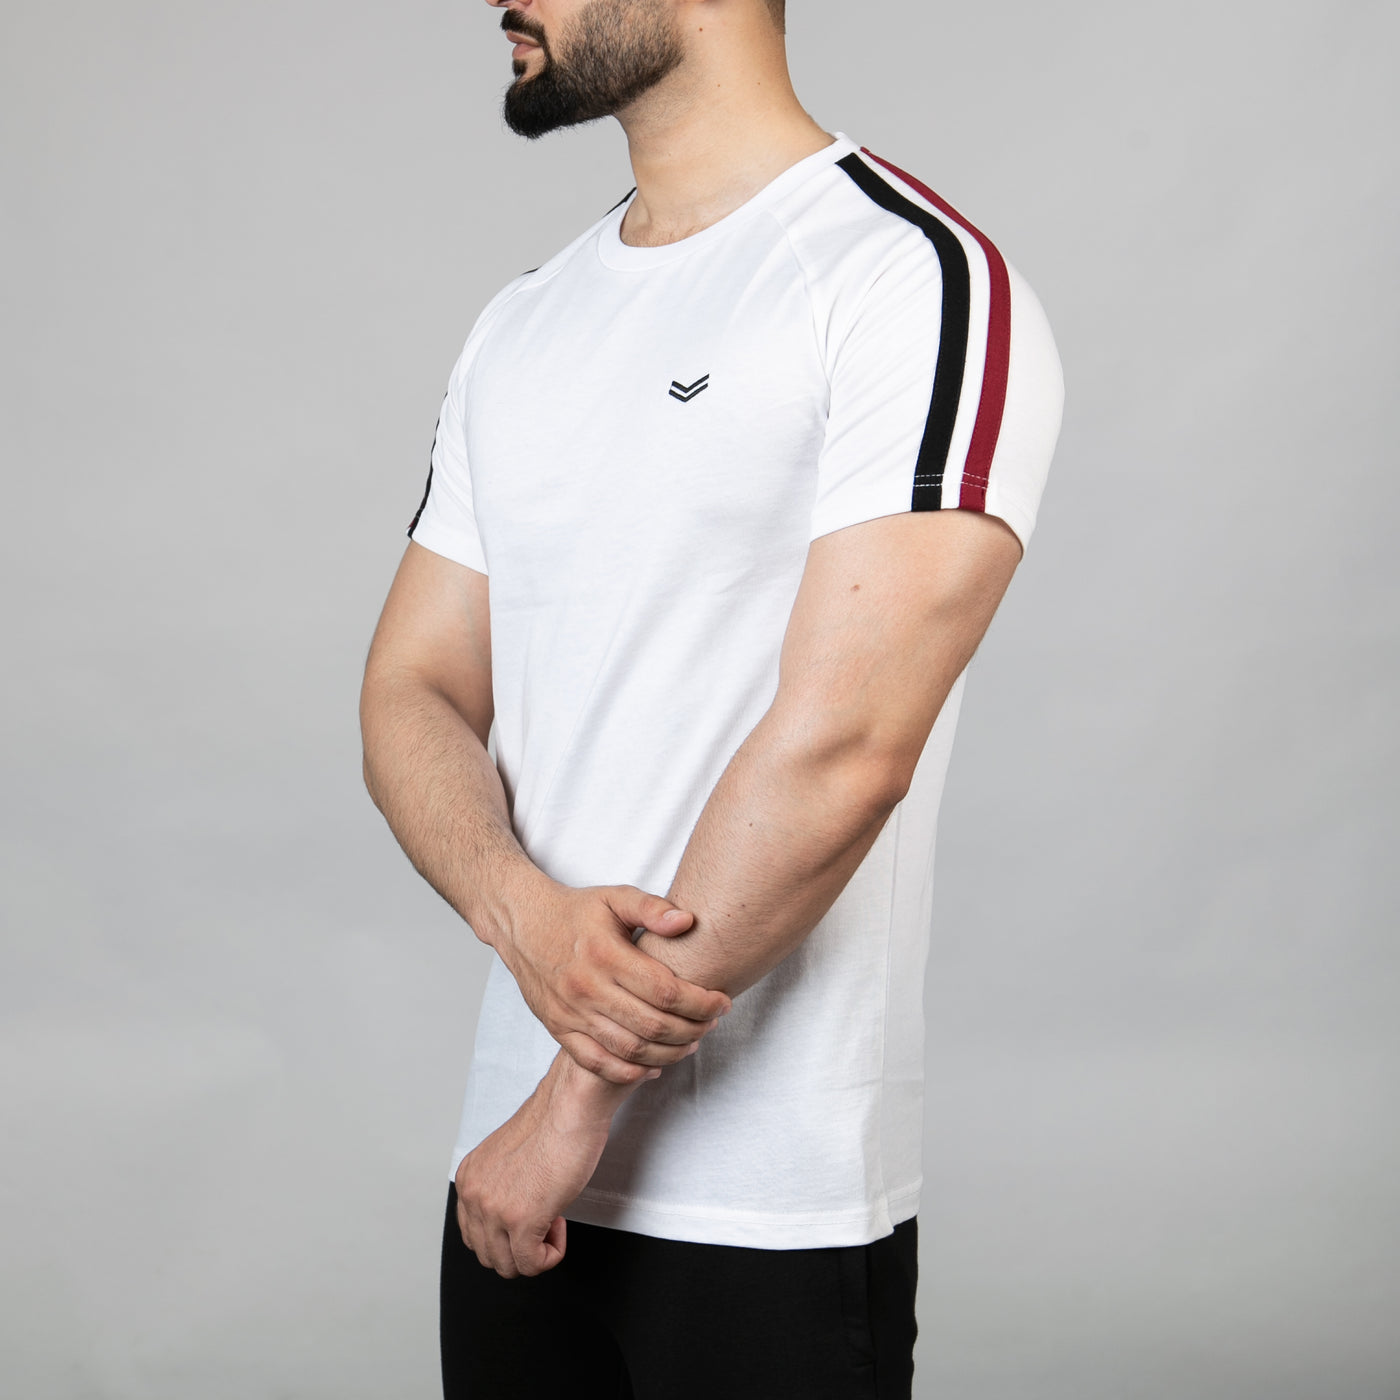 White T-Shirt with Black & Red Shoulder Stripes